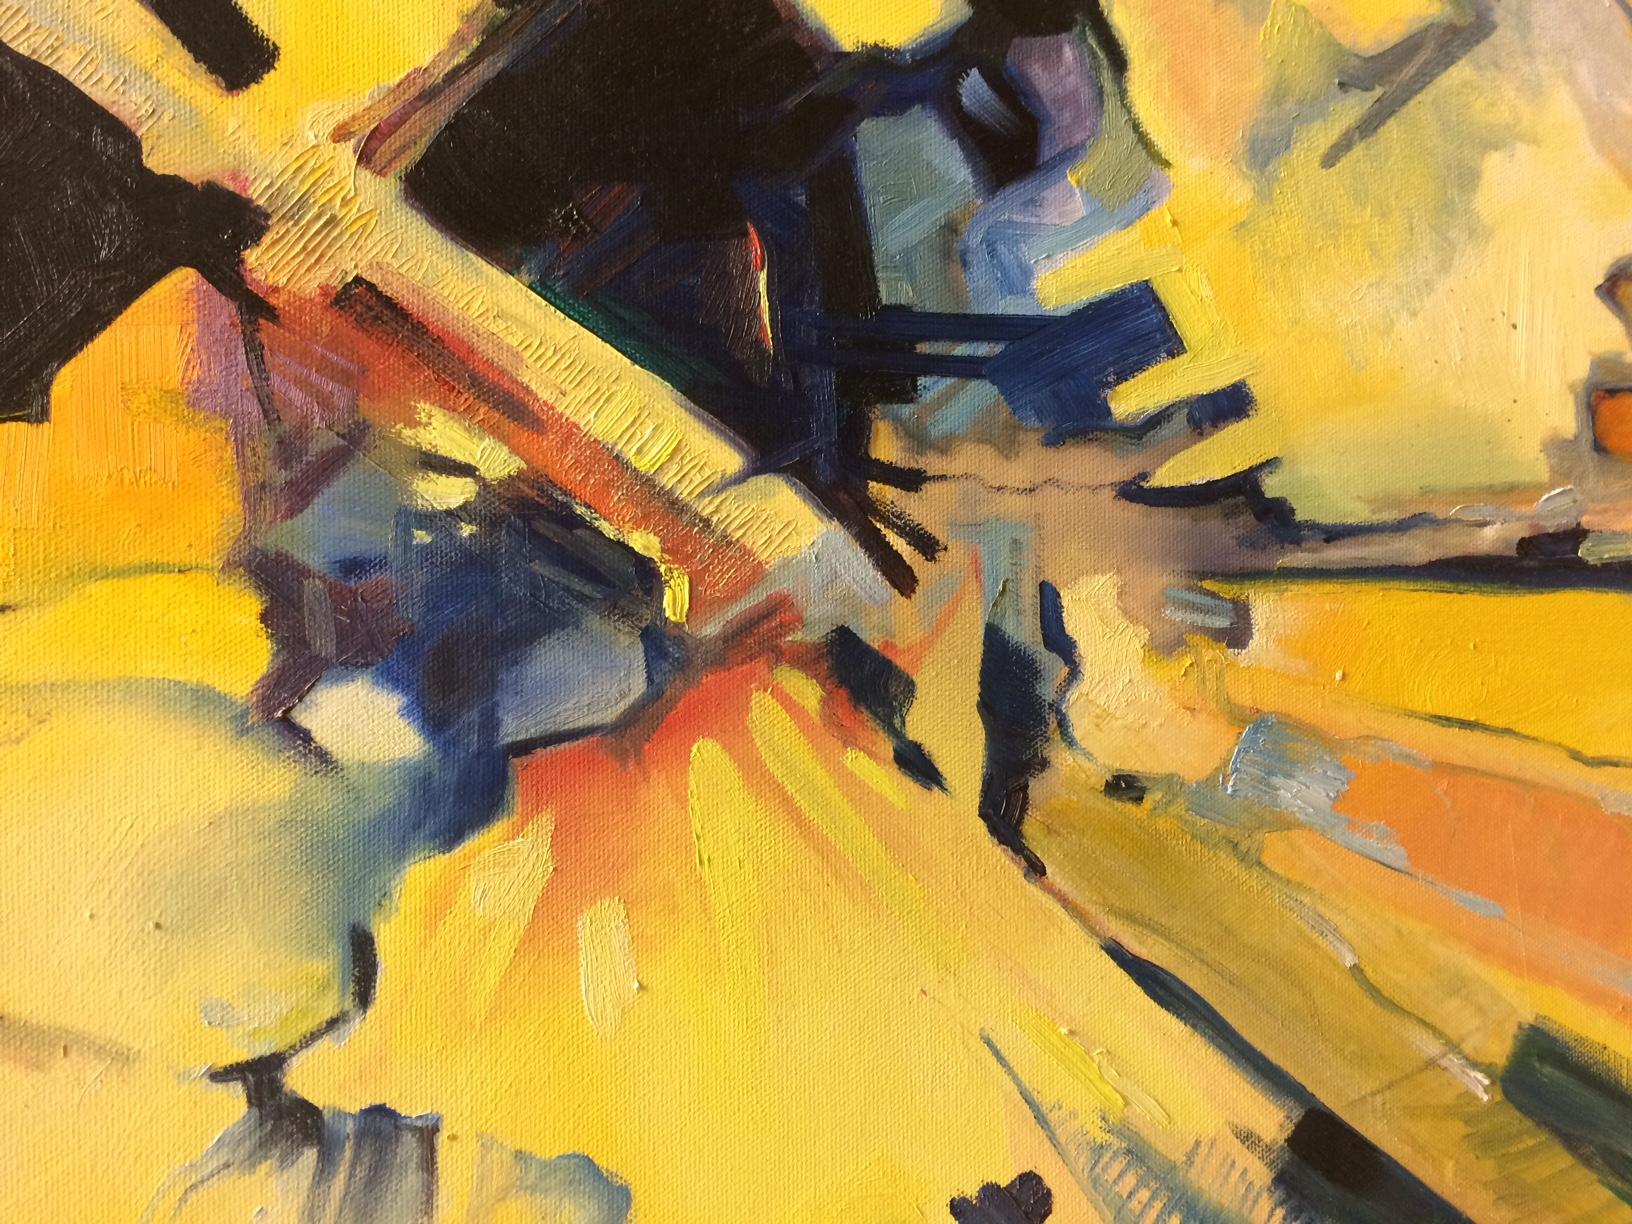 Big Yellow, original 40x30 abstract oil painting - Painting by Kirk Larsen